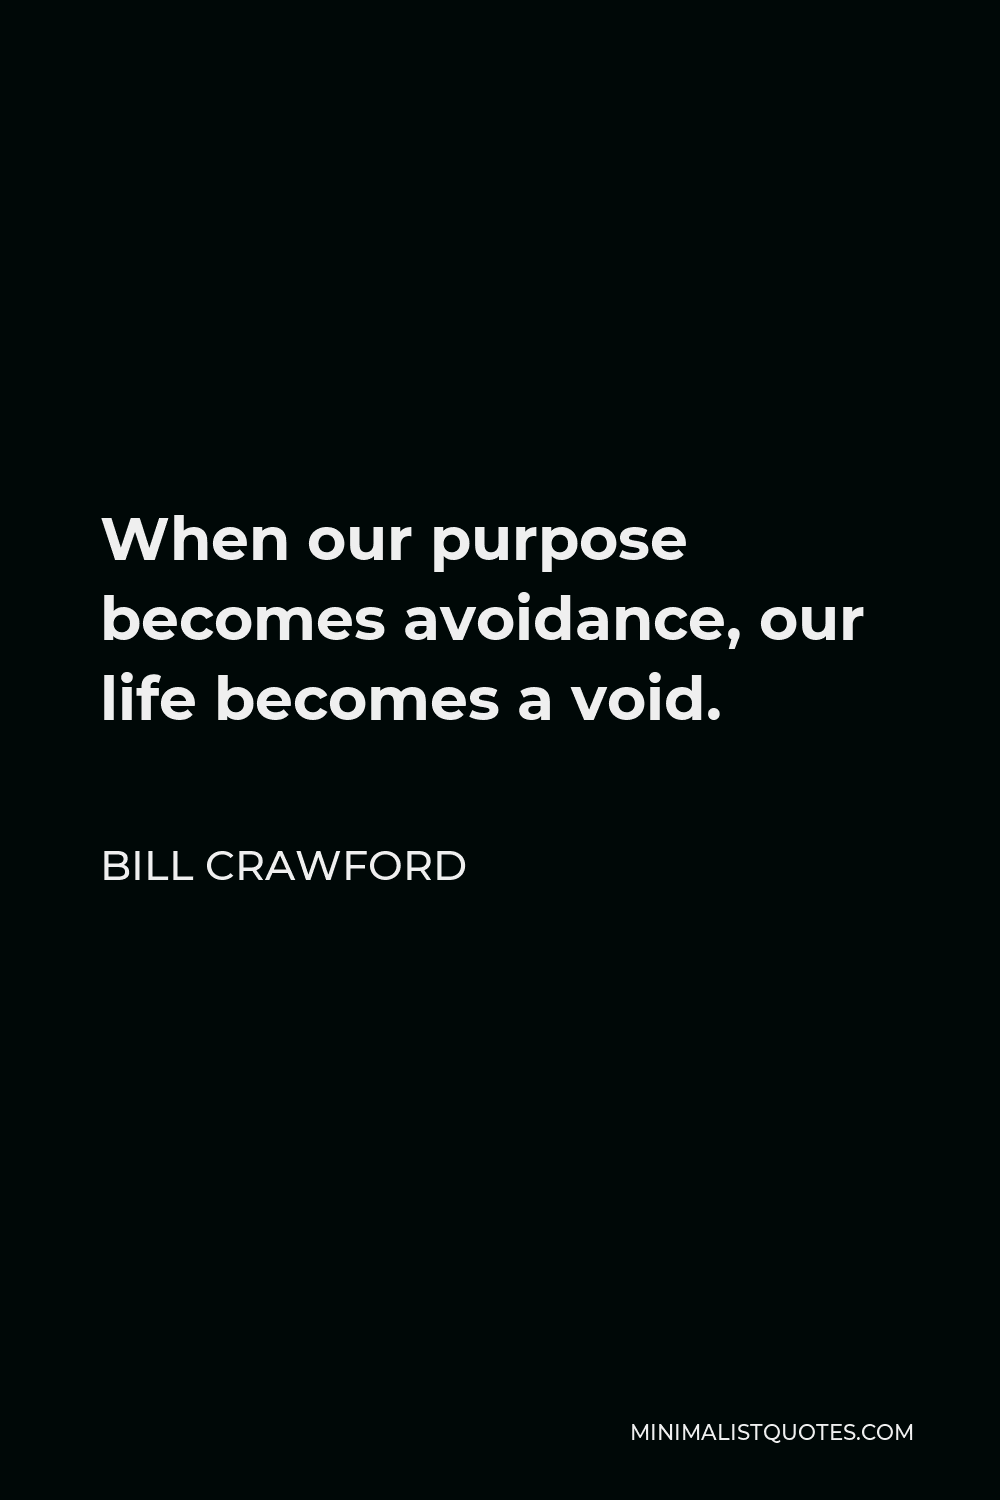 Bill Crawford Quote - When our purpose becomes avoidance, our life becomes a void.